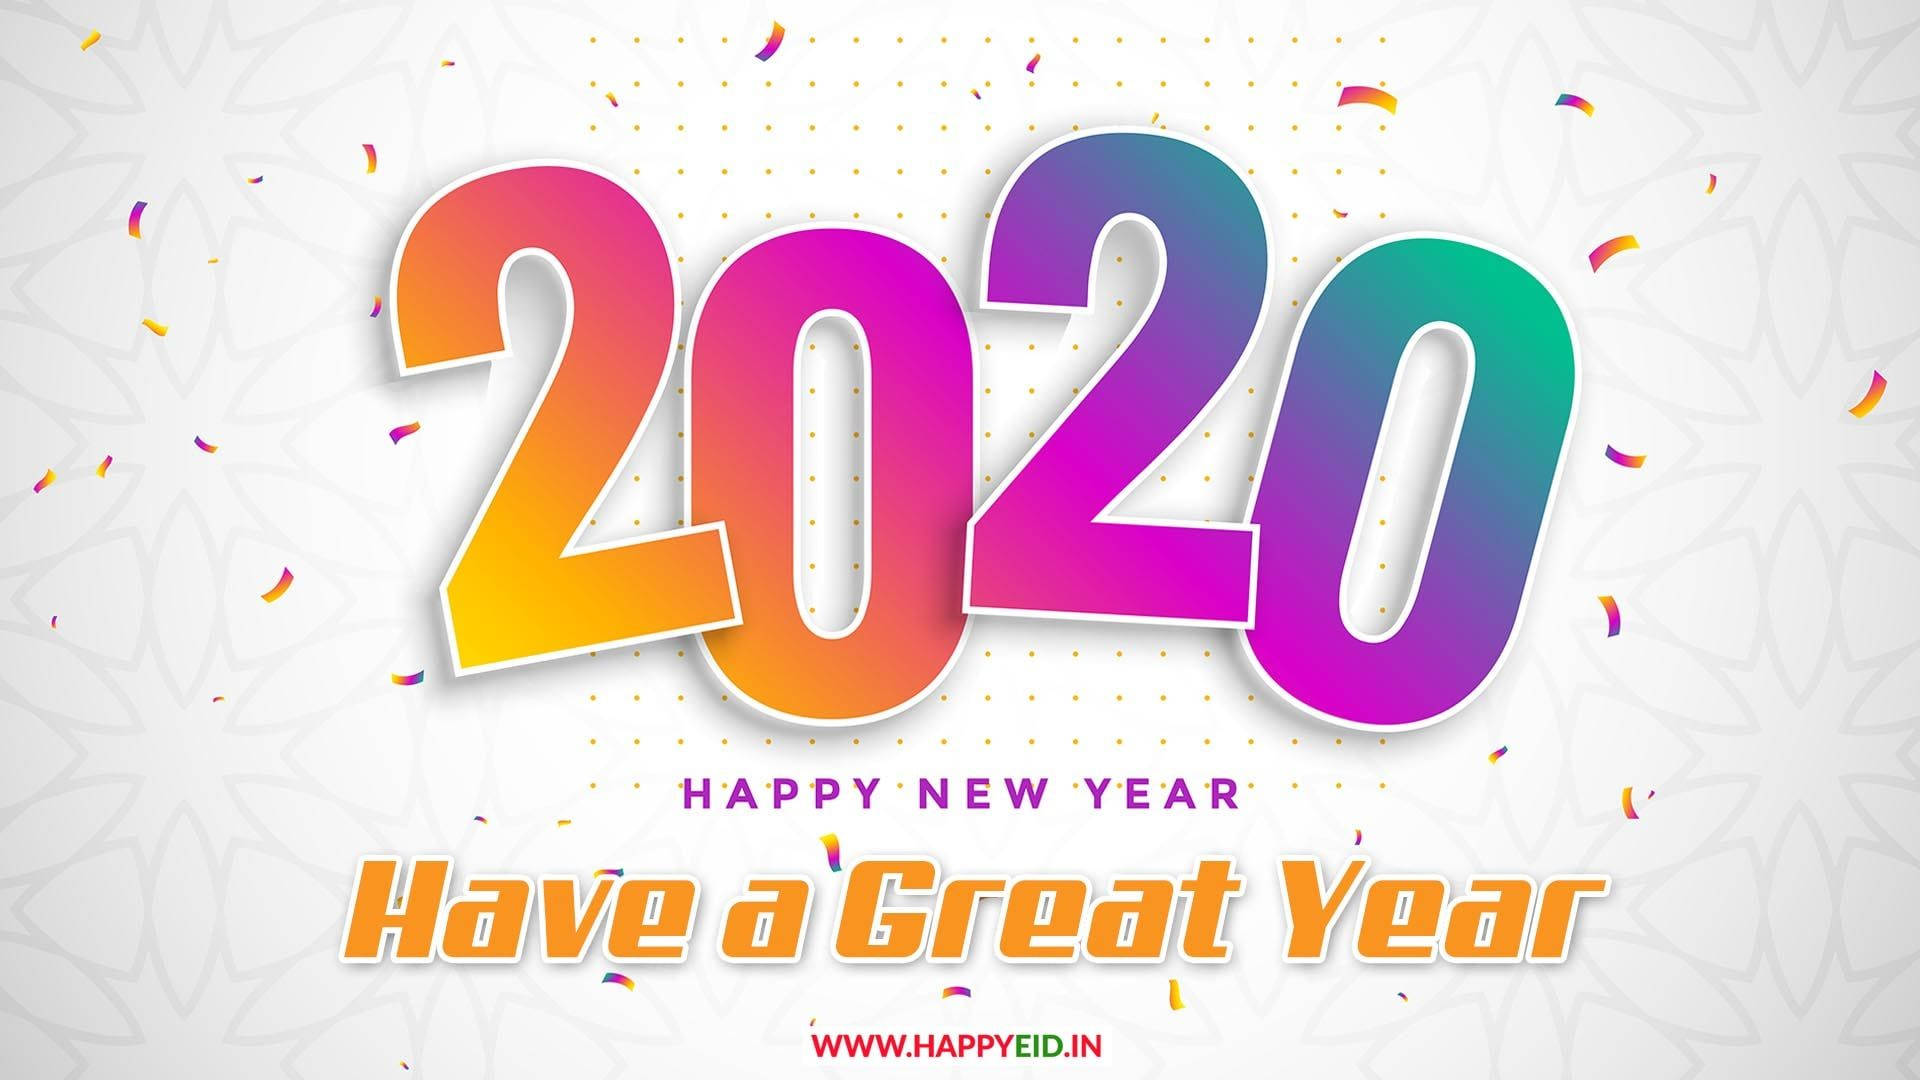 Wishing you a happy new year 2020! Wallpaper